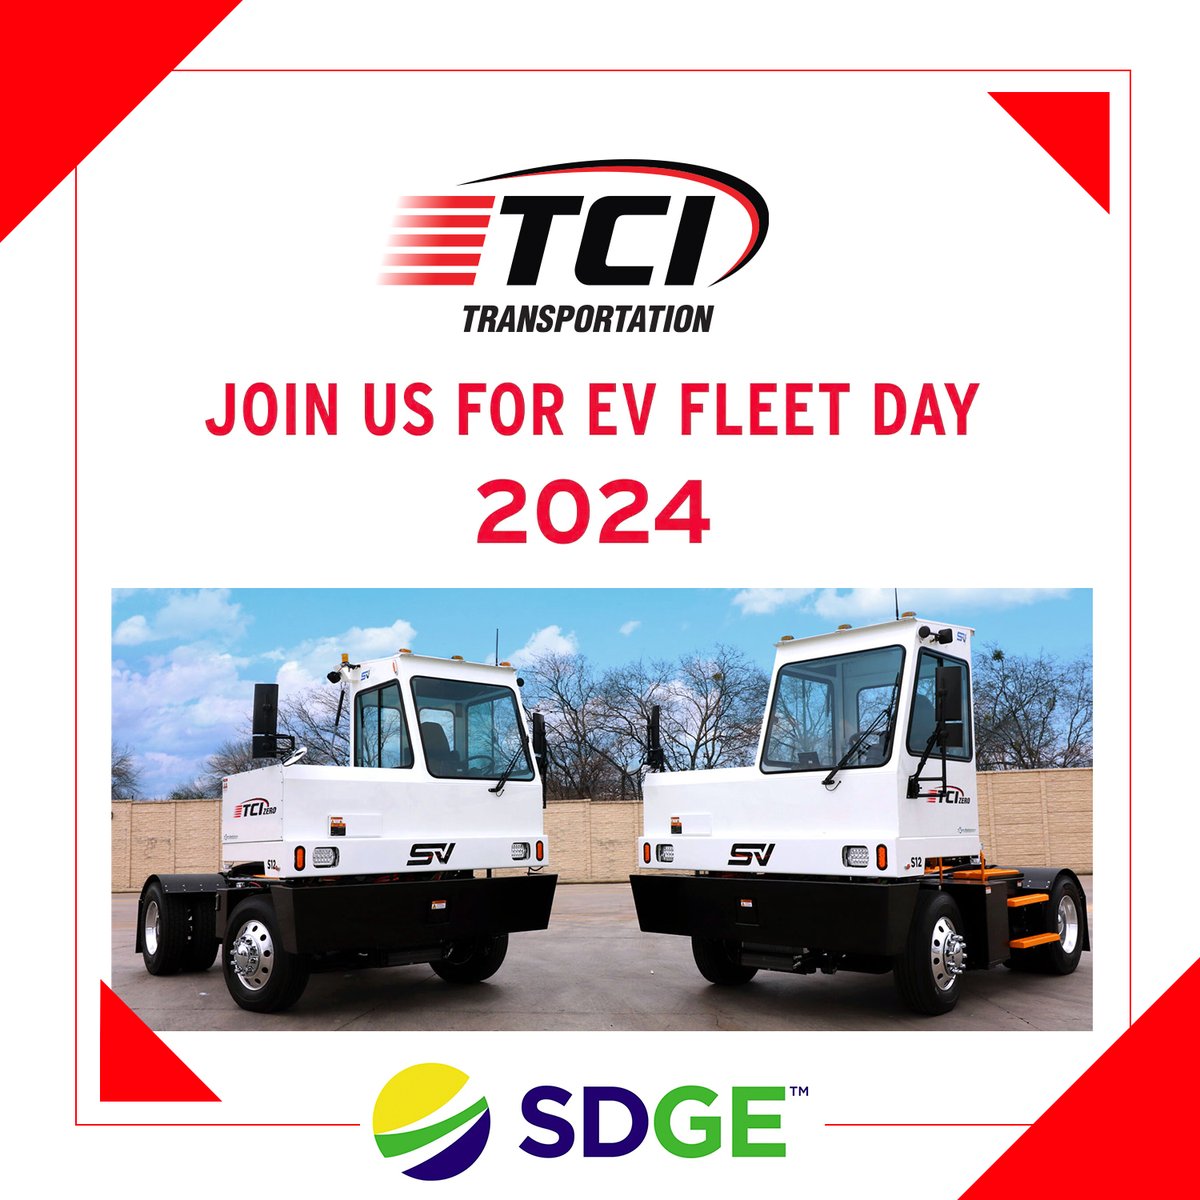 Join TCI Transportation at the SDGE EV Fleet Day in San Diego, at the SDG&E Innovation Center, this Friday, April 19, 2024, from 9:00 AM to 2:00 PM! 🌍✨

For more information and event details, visit: SDGE EV Fleet Day —> evfleetday.com 

#TCITransportation #EVFleetDay